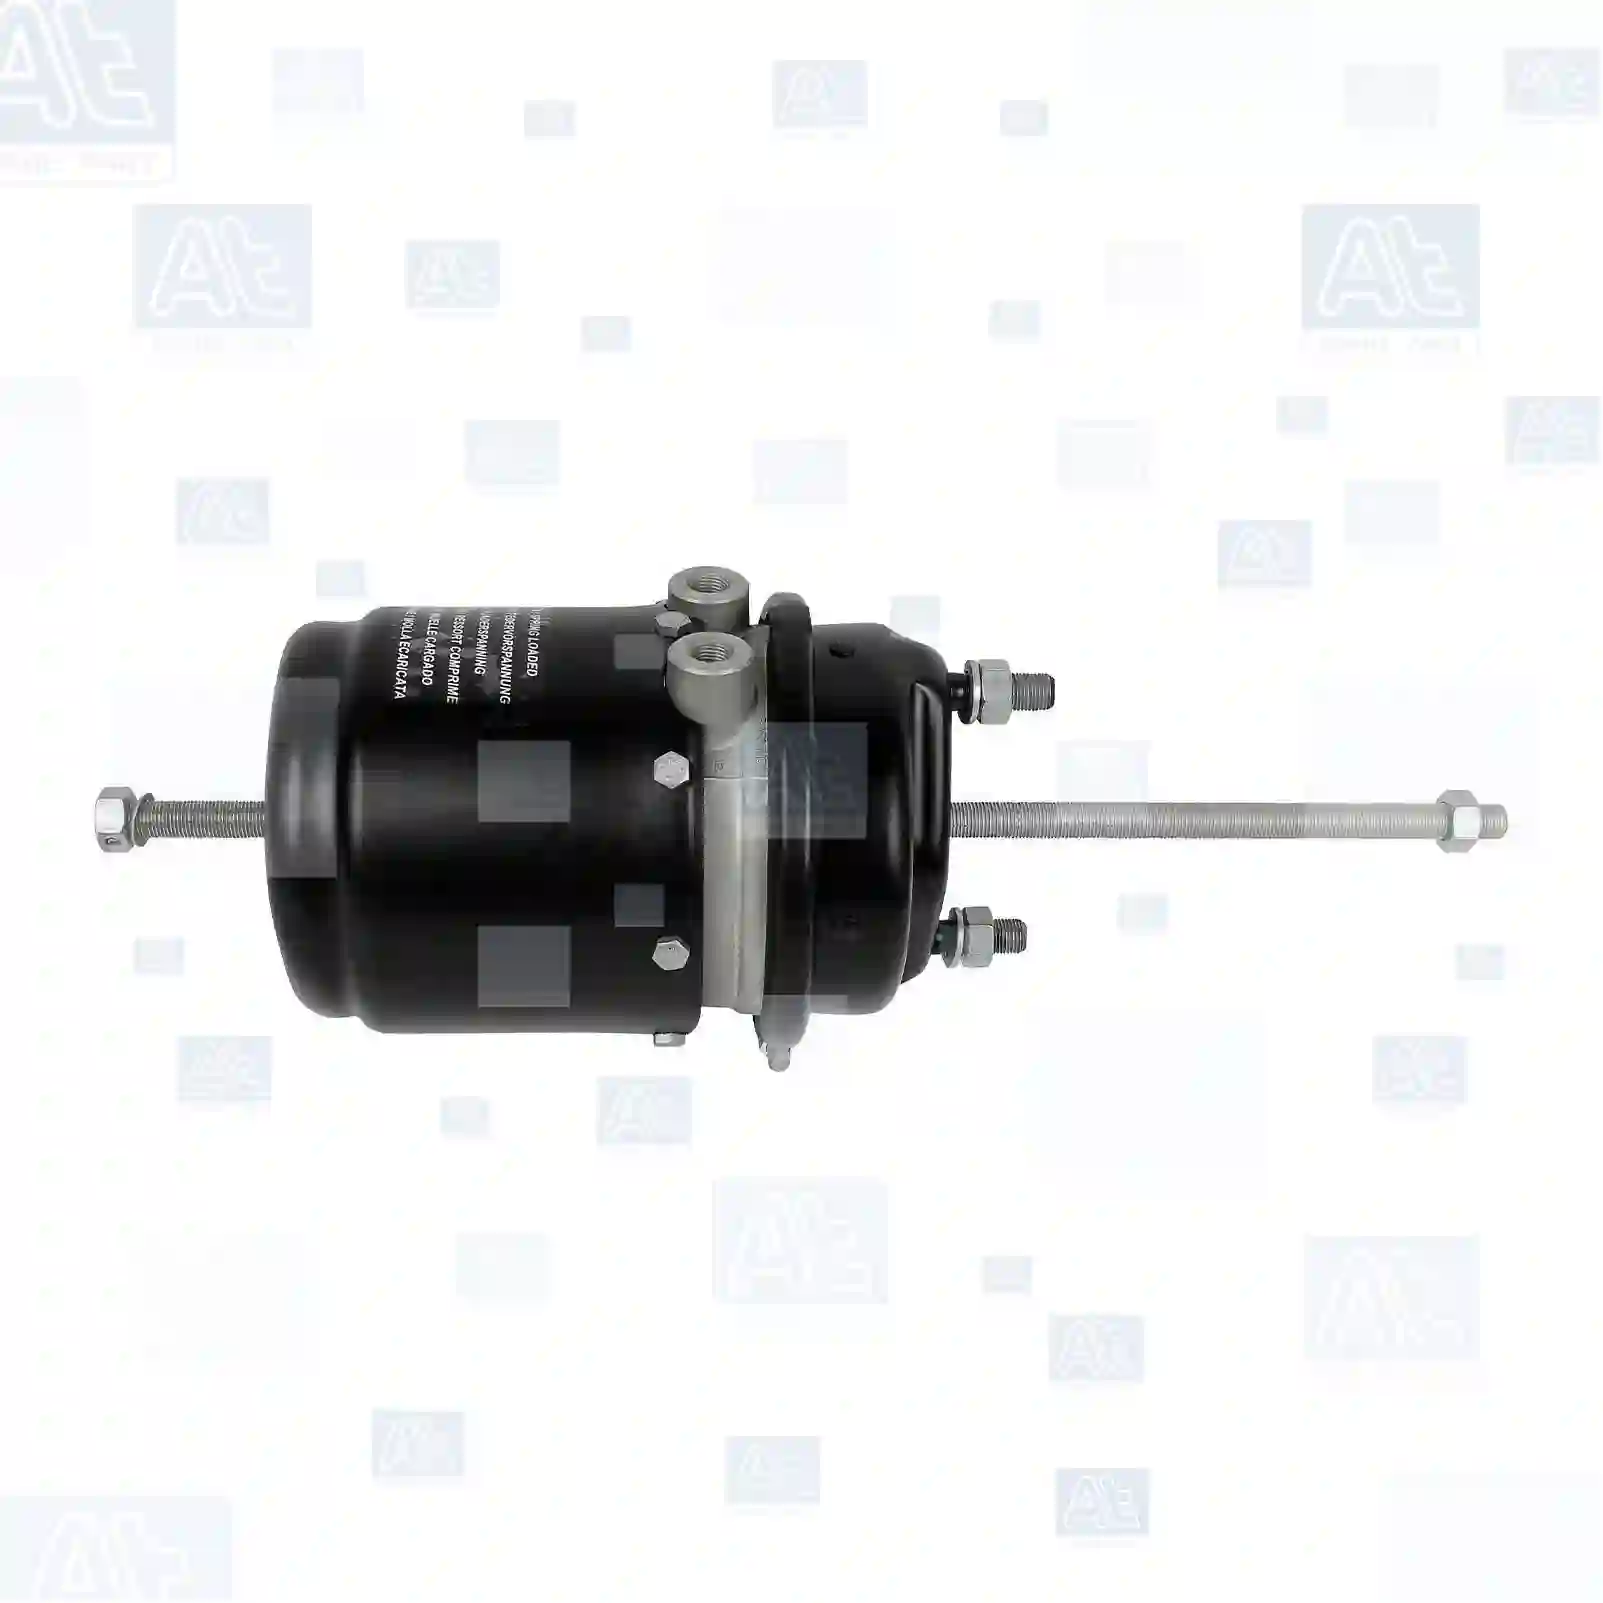 Spring brake cylinder, at no 77714512, oem no: 7420438487, 7420533196, 10570531, 10570534, 10571751, 10571770, 1115862, 1331412, 1331416, 1571770, 295390, 302268, 365928, 365929, 570531, 570534, 571751, 571770, 1606835, 1606836, 1606887, 1609803, 1626182, 1626183, 1626184, 1626185, 1626445, 1626446, 1629514, 1629515, 20438487, 20533195, 20533196, 3963094, 3963095, 5003225, 5003226, 5003484, 5003485, 8112624, 8112625, 8113112, 8113540, 8113541, 8113558, 8118624, 8118625, 8119540, 8119541, 8154233, 8154234, 85000581, ZG50770-0008 At Spare Part | Engine, Accelerator Pedal, Camshaft, Connecting Rod, Crankcase, Crankshaft, Cylinder Head, Engine Suspension Mountings, Exhaust Manifold, Exhaust Gas Recirculation, Filter Kits, Flywheel Housing, General Overhaul Kits, Engine, Intake Manifold, Oil Cleaner, Oil Cooler, Oil Filter, Oil Pump, Oil Sump, Piston & Liner, Sensor & Switch, Timing Case, Turbocharger, Cooling System, Belt Tensioner, Coolant Filter, Coolant Pipe, Corrosion Prevention Agent, Drive, Expansion Tank, Fan, Intercooler, Monitors & Gauges, Radiator, Thermostat, V-Belt / Timing belt, Water Pump, Fuel System, Electronical Injector Unit, Feed Pump, Fuel Filter, cpl., Fuel Gauge Sender,  Fuel Line, Fuel Pump, Fuel Tank, Injection Line Kit, Injection Pump, Exhaust System, Clutch & Pedal, Gearbox, Propeller Shaft, Axles, Brake System, Hubs & Wheels, Suspension, Leaf Spring, Universal Parts / Accessories, Steering, Electrical System, Cabin Spring brake cylinder, at no 77714512, oem no: 7420438487, 7420533196, 10570531, 10570534, 10571751, 10571770, 1115862, 1331412, 1331416, 1571770, 295390, 302268, 365928, 365929, 570531, 570534, 571751, 571770, 1606835, 1606836, 1606887, 1609803, 1626182, 1626183, 1626184, 1626185, 1626445, 1626446, 1629514, 1629515, 20438487, 20533195, 20533196, 3963094, 3963095, 5003225, 5003226, 5003484, 5003485, 8112624, 8112625, 8113112, 8113540, 8113541, 8113558, 8118624, 8118625, 8119540, 8119541, 8154233, 8154234, 85000581, ZG50770-0008 At Spare Part | Engine, Accelerator Pedal, Camshaft, Connecting Rod, Crankcase, Crankshaft, Cylinder Head, Engine Suspension Mountings, Exhaust Manifold, Exhaust Gas Recirculation, Filter Kits, Flywheel Housing, General Overhaul Kits, Engine, Intake Manifold, Oil Cleaner, Oil Cooler, Oil Filter, Oil Pump, Oil Sump, Piston & Liner, Sensor & Switch, Timing Case, Turbocharger, Cooling System, Belt Tensioner, Coolant Filter, Coolant Pipe, Corrosion Prevention Agent, Drive, Expansion Tank, Fan, Intercooler, Monitors & Gauges, Radiator, Thermostat, V-Belt / Timing belt, Water Pump, Fuel System, Electronical Injector Unit, Feed Pump, Fuel Filter, cpl., Fuel Gauge Sender,  Fuel Line, Fuel Pump, Fuel Tank, Injection Line Kit, Injection Pump, Exhaust System, Clutch & Pedal, Gearbox, Propeller Shaft, Axles, Brake System, Hubs & Wheels, Suspension, Leaf Spring, Universal Parts / Accessories, Steering, Electrical System, Cabin